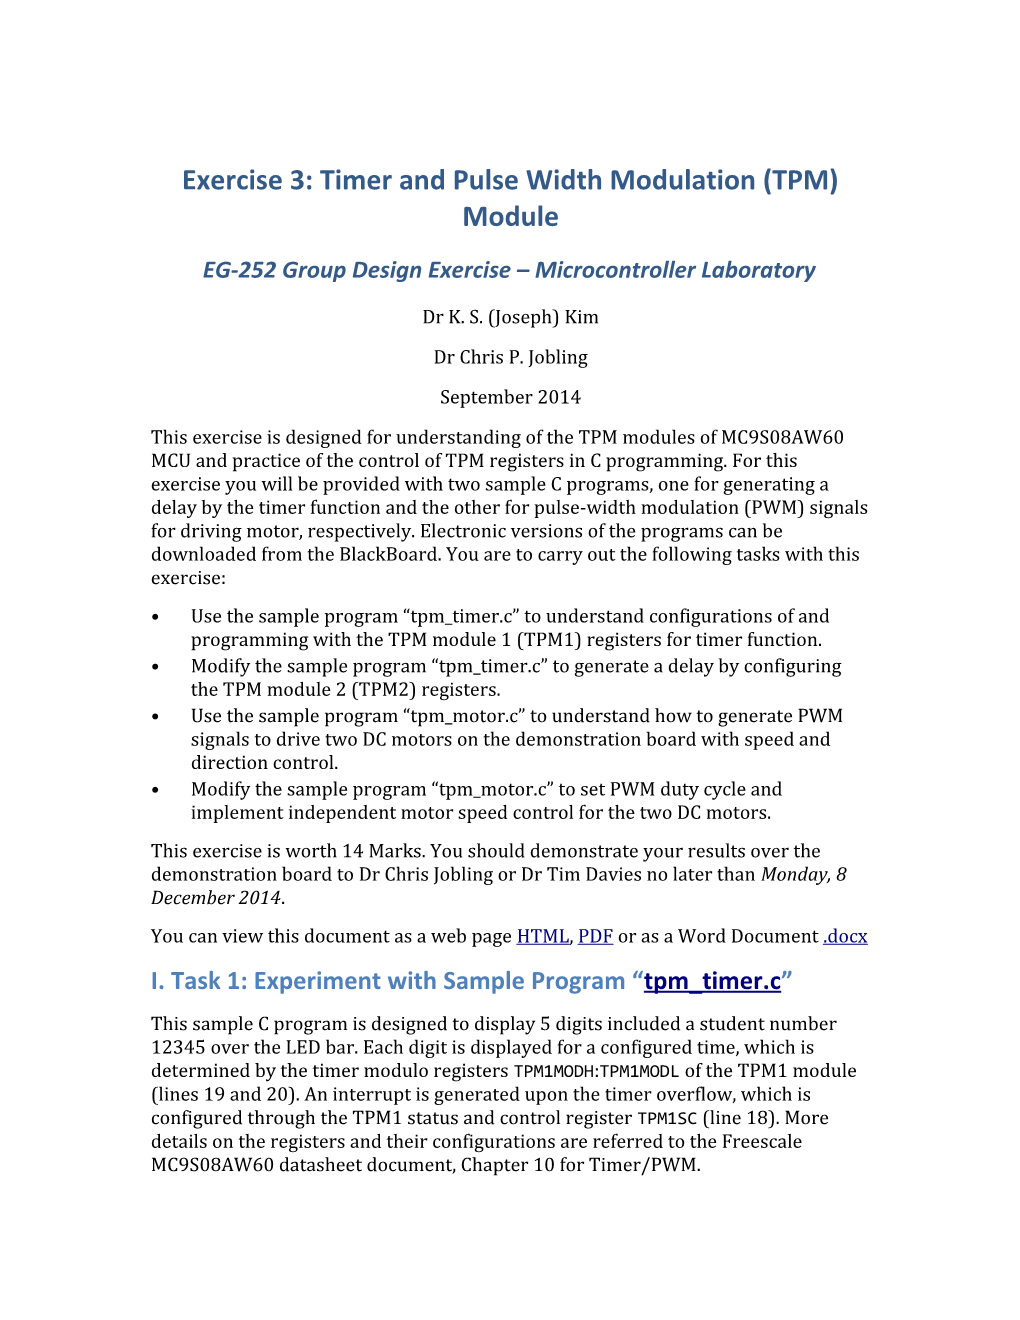 Exercise 3: Timer and Pulse Width Modulation (TPM) Module